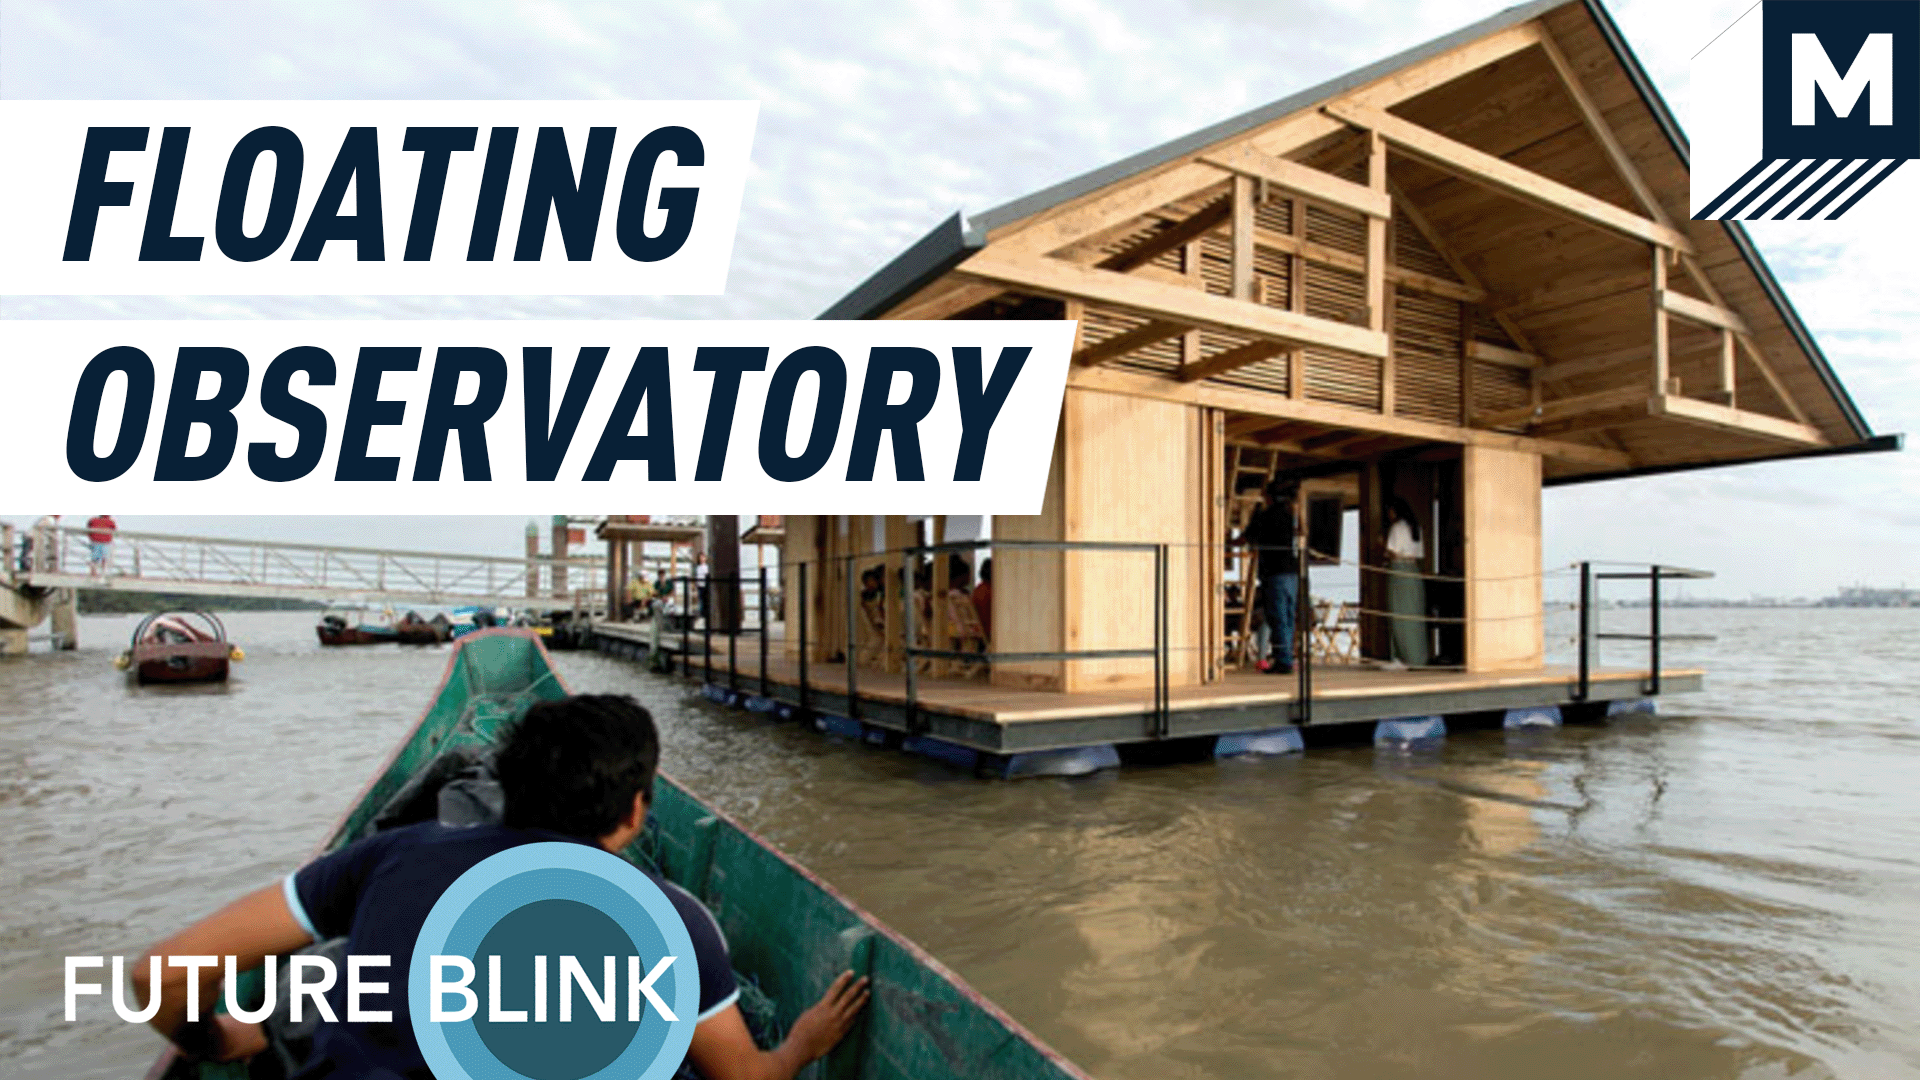 In Ecuador, a floating building is bringing the community together